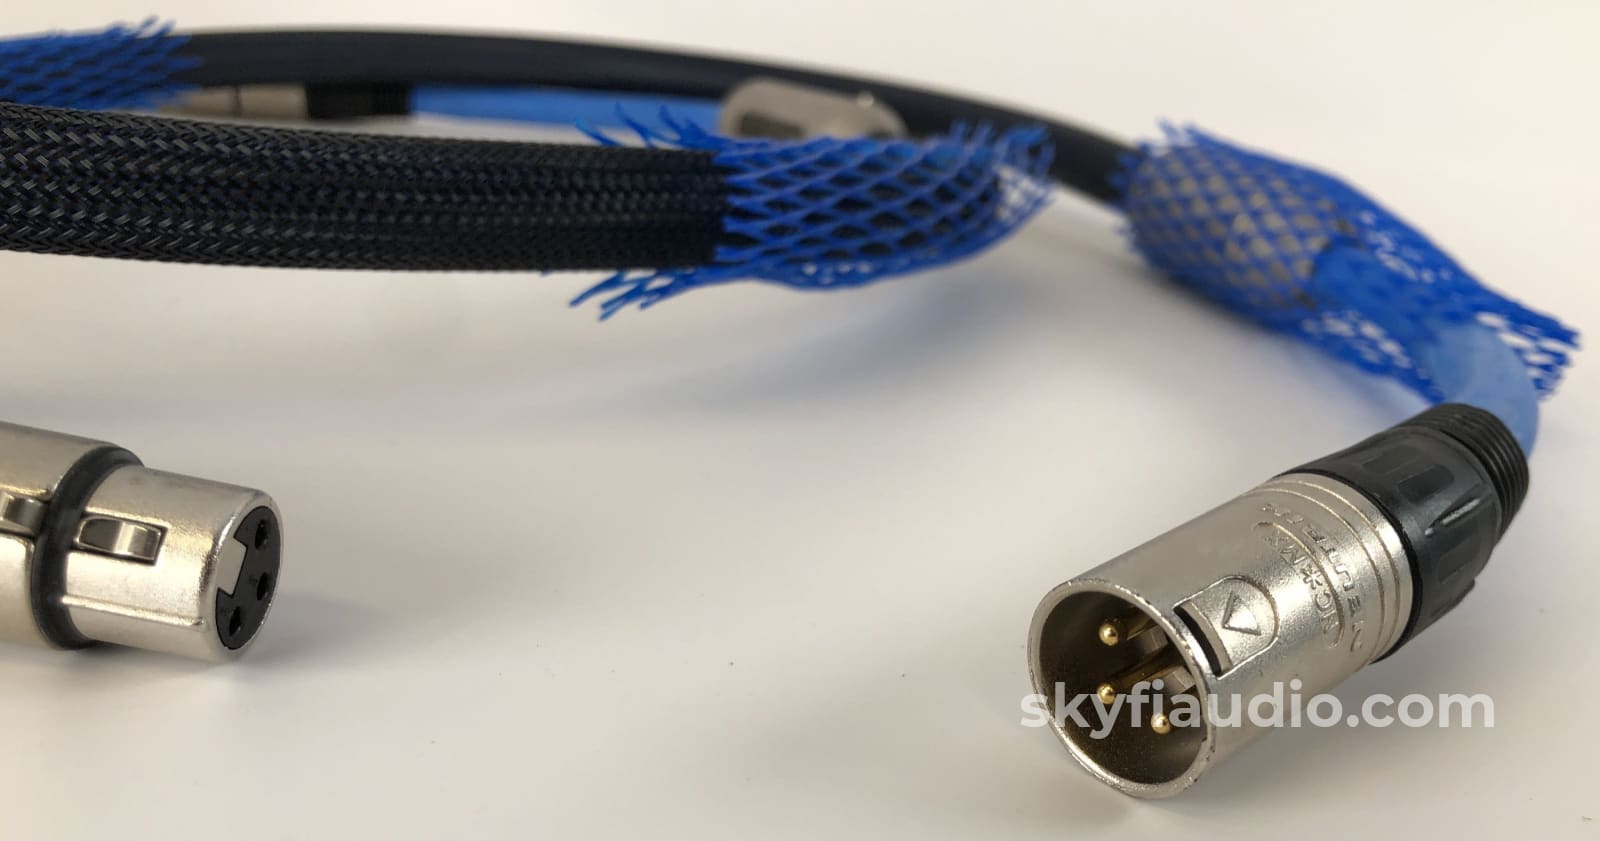 Siltech Cables - Compass Lake Xlr Audio Cable With Satt Upgrade 1M